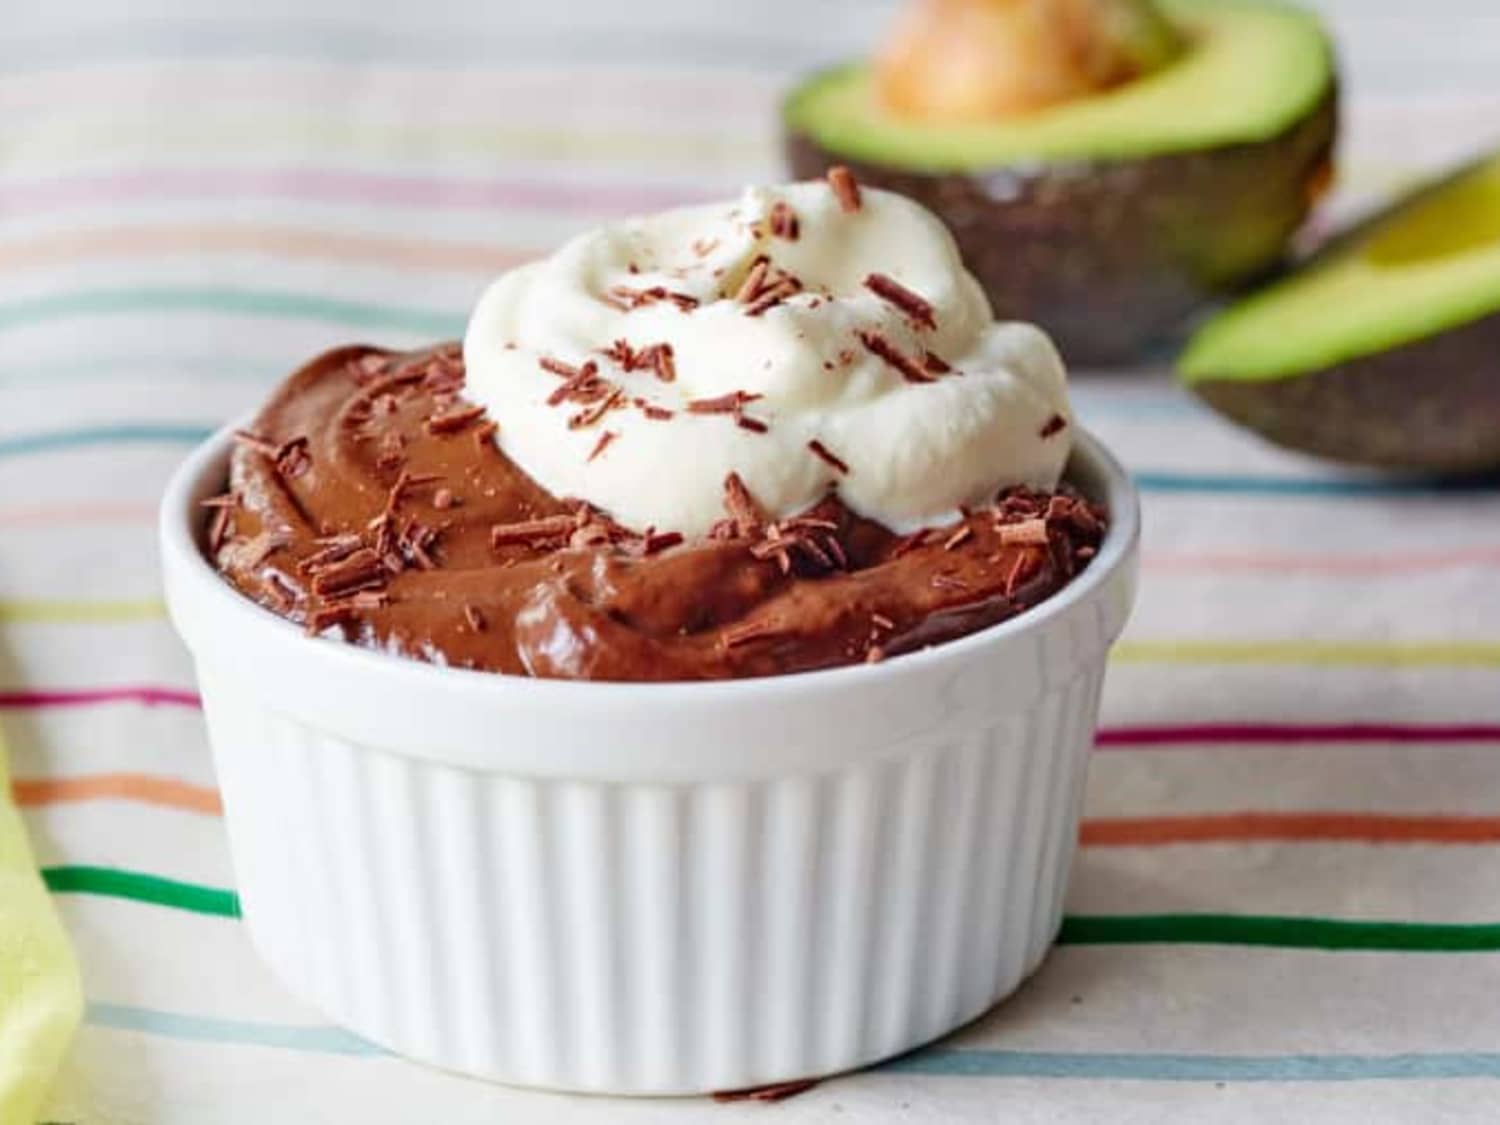 How To Make the Best Chocolate Avocado Pudding | The Kitchn